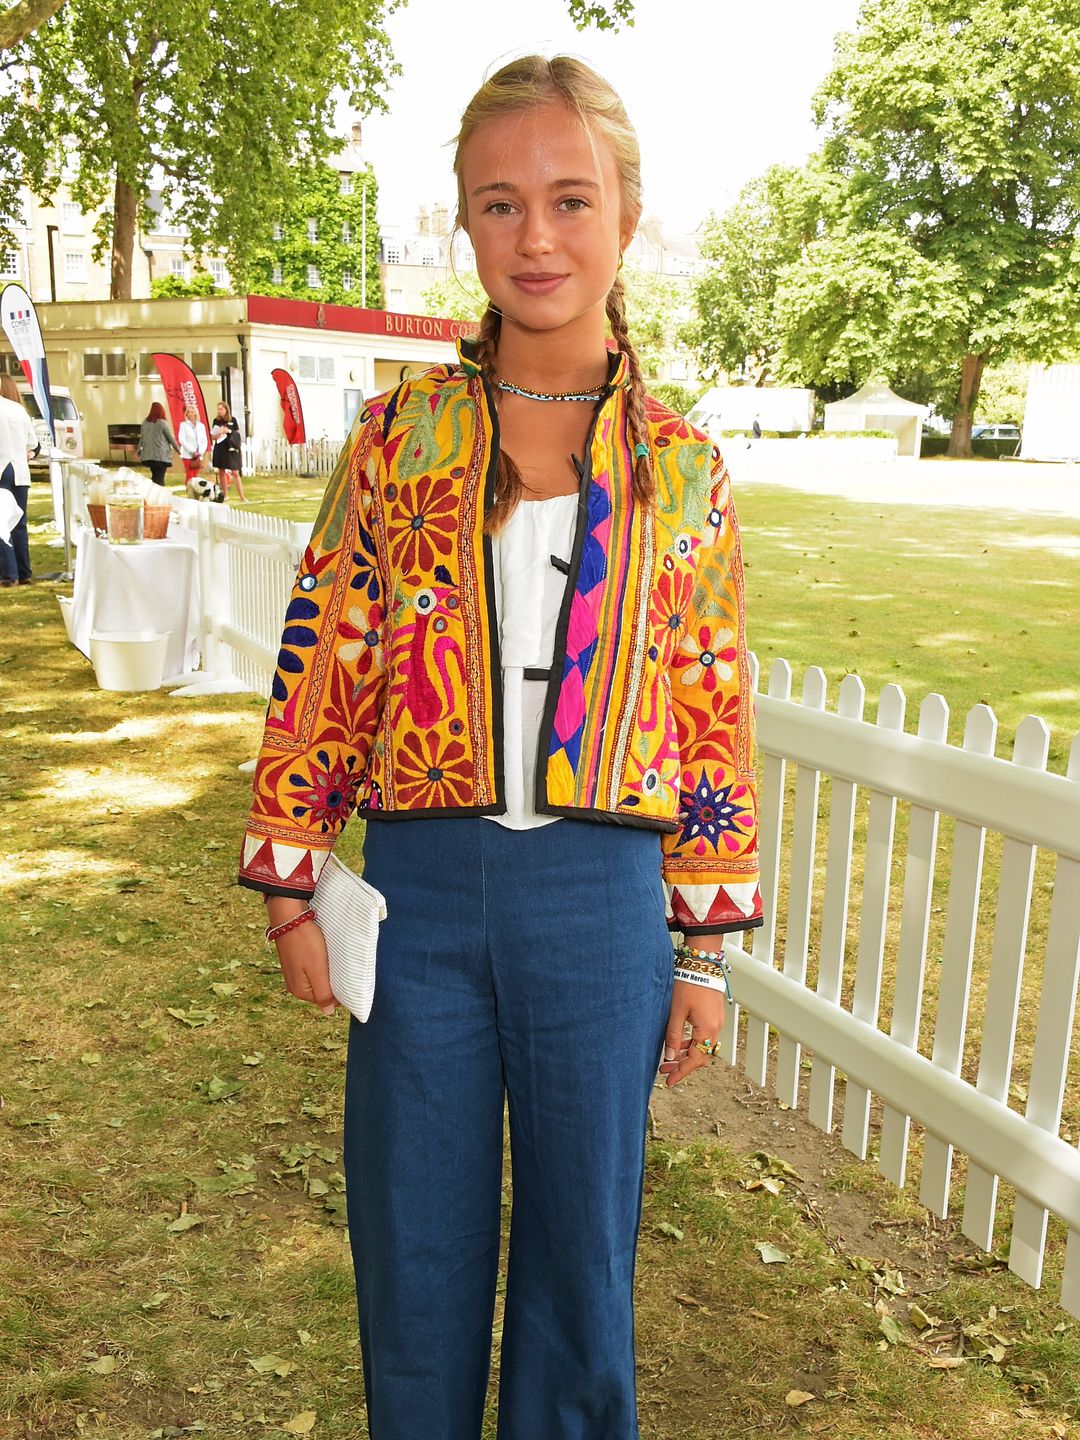 Lady Amelia Windsor in a flannel jacket and jeans